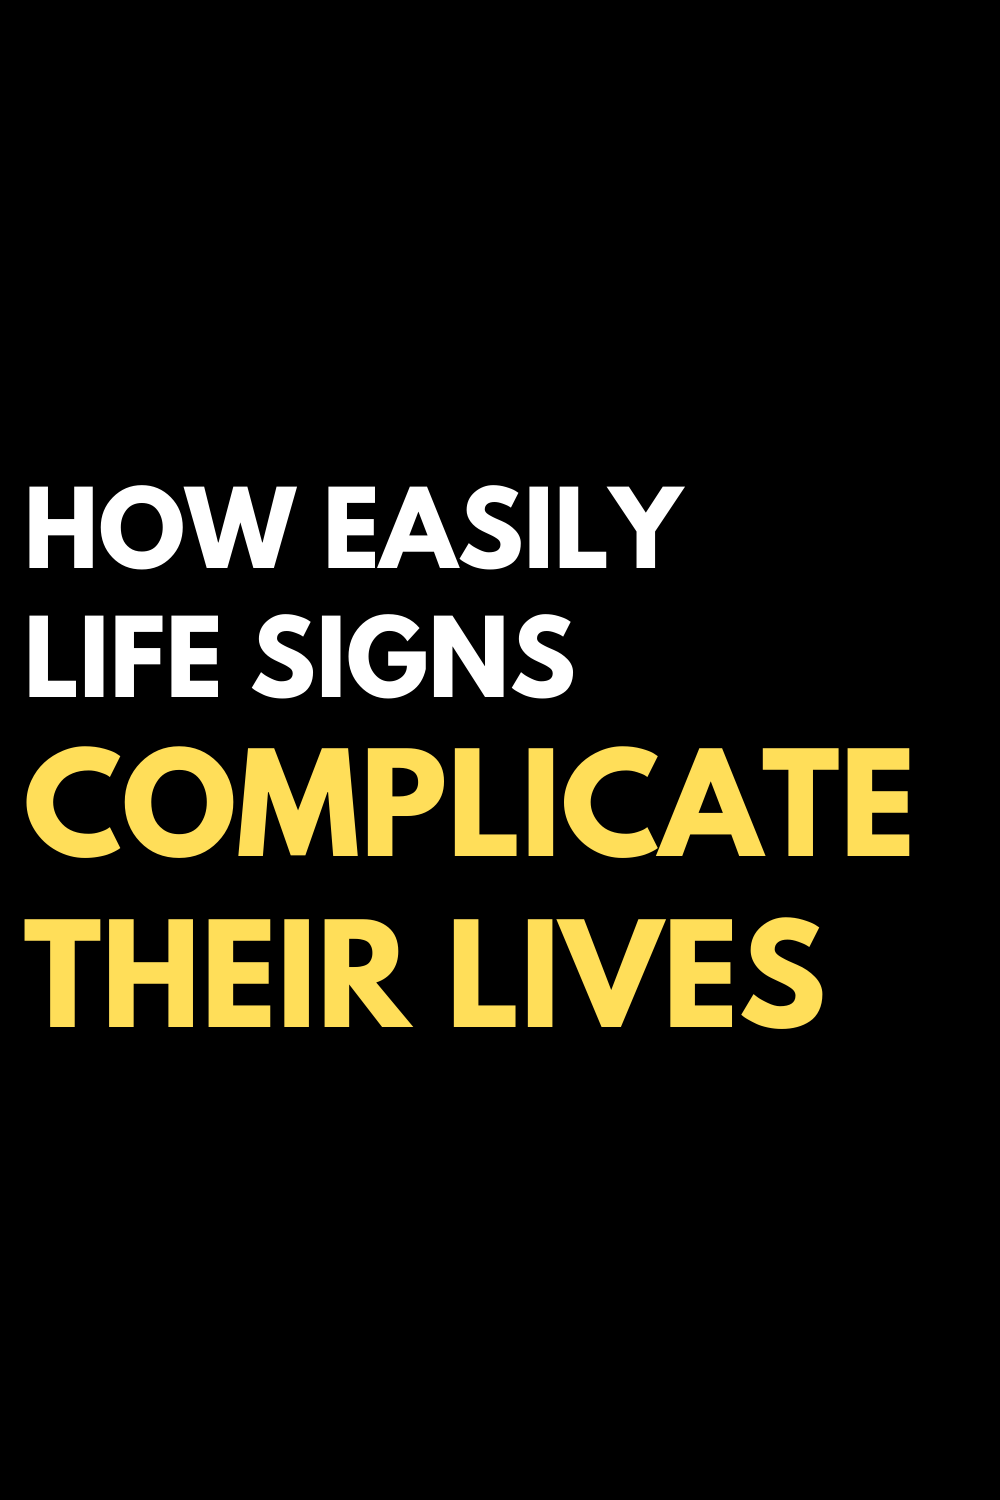 How easily life signs complicate their lives